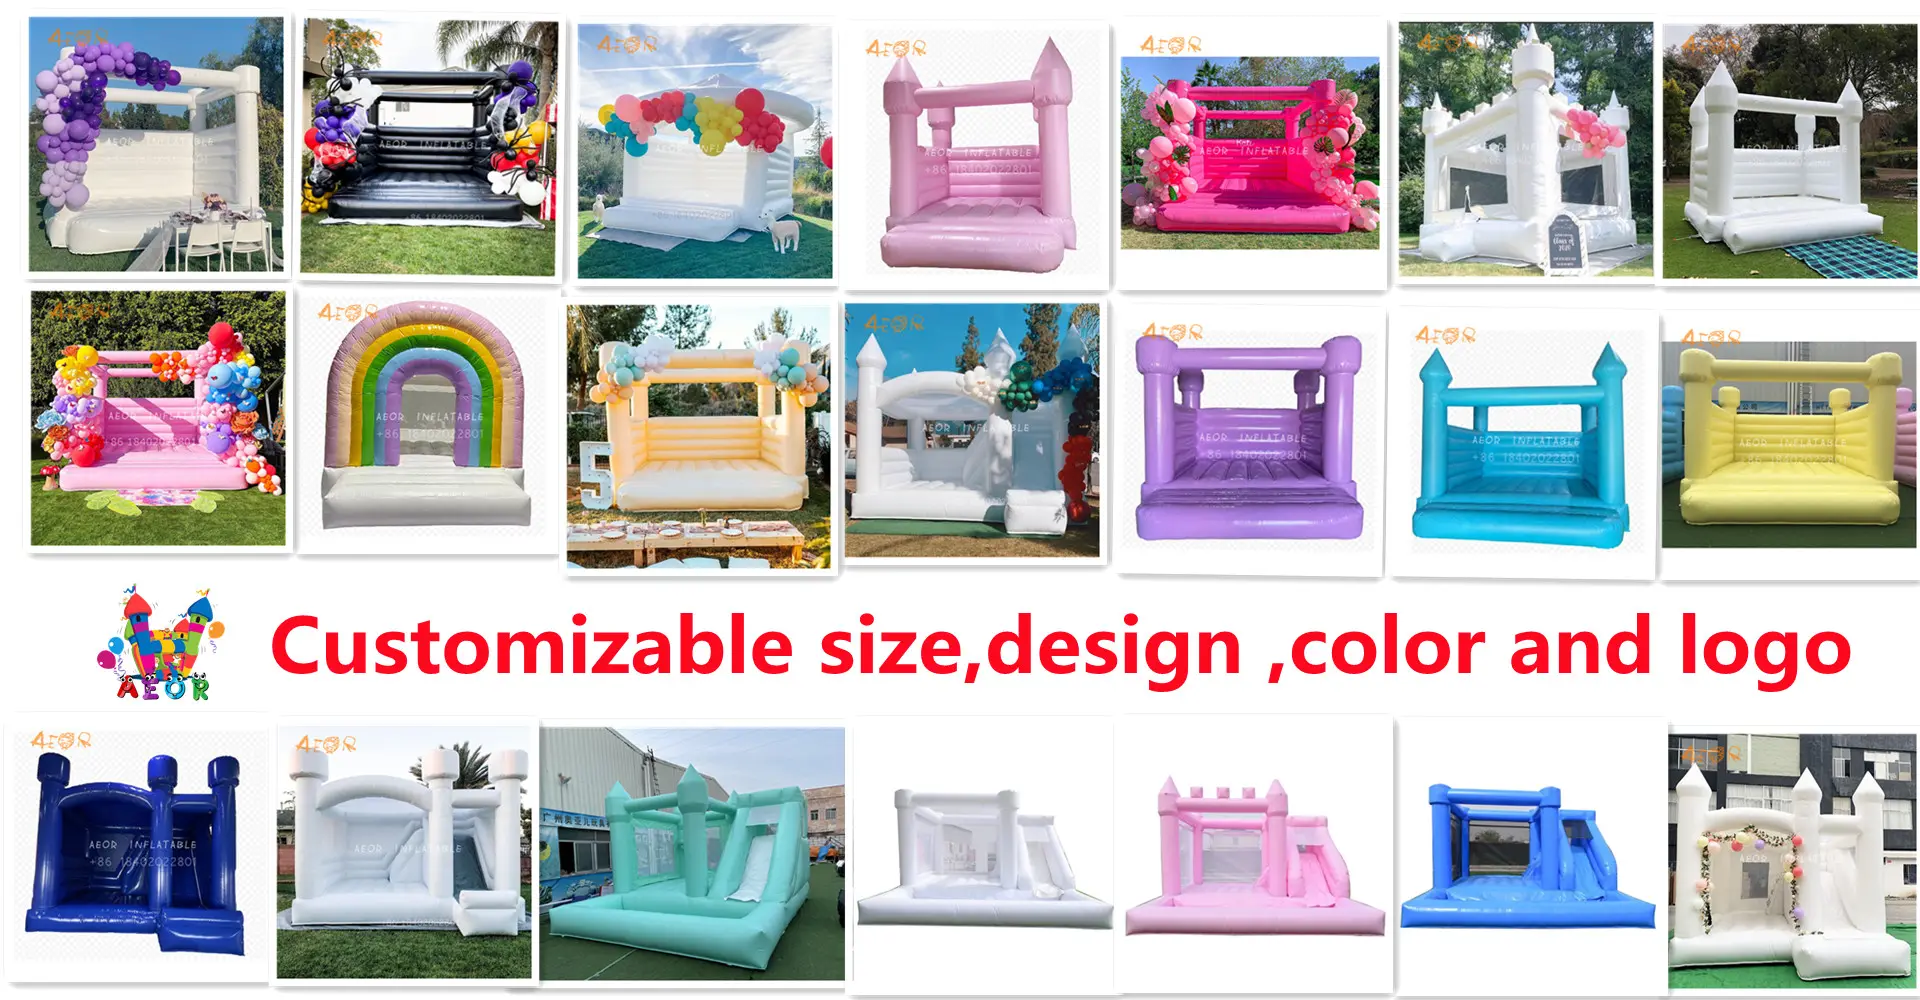 Commercial PVC Inflatable Bouncy Castle With Ball Pit Soft Play Bounce House White Inflatable Jumper